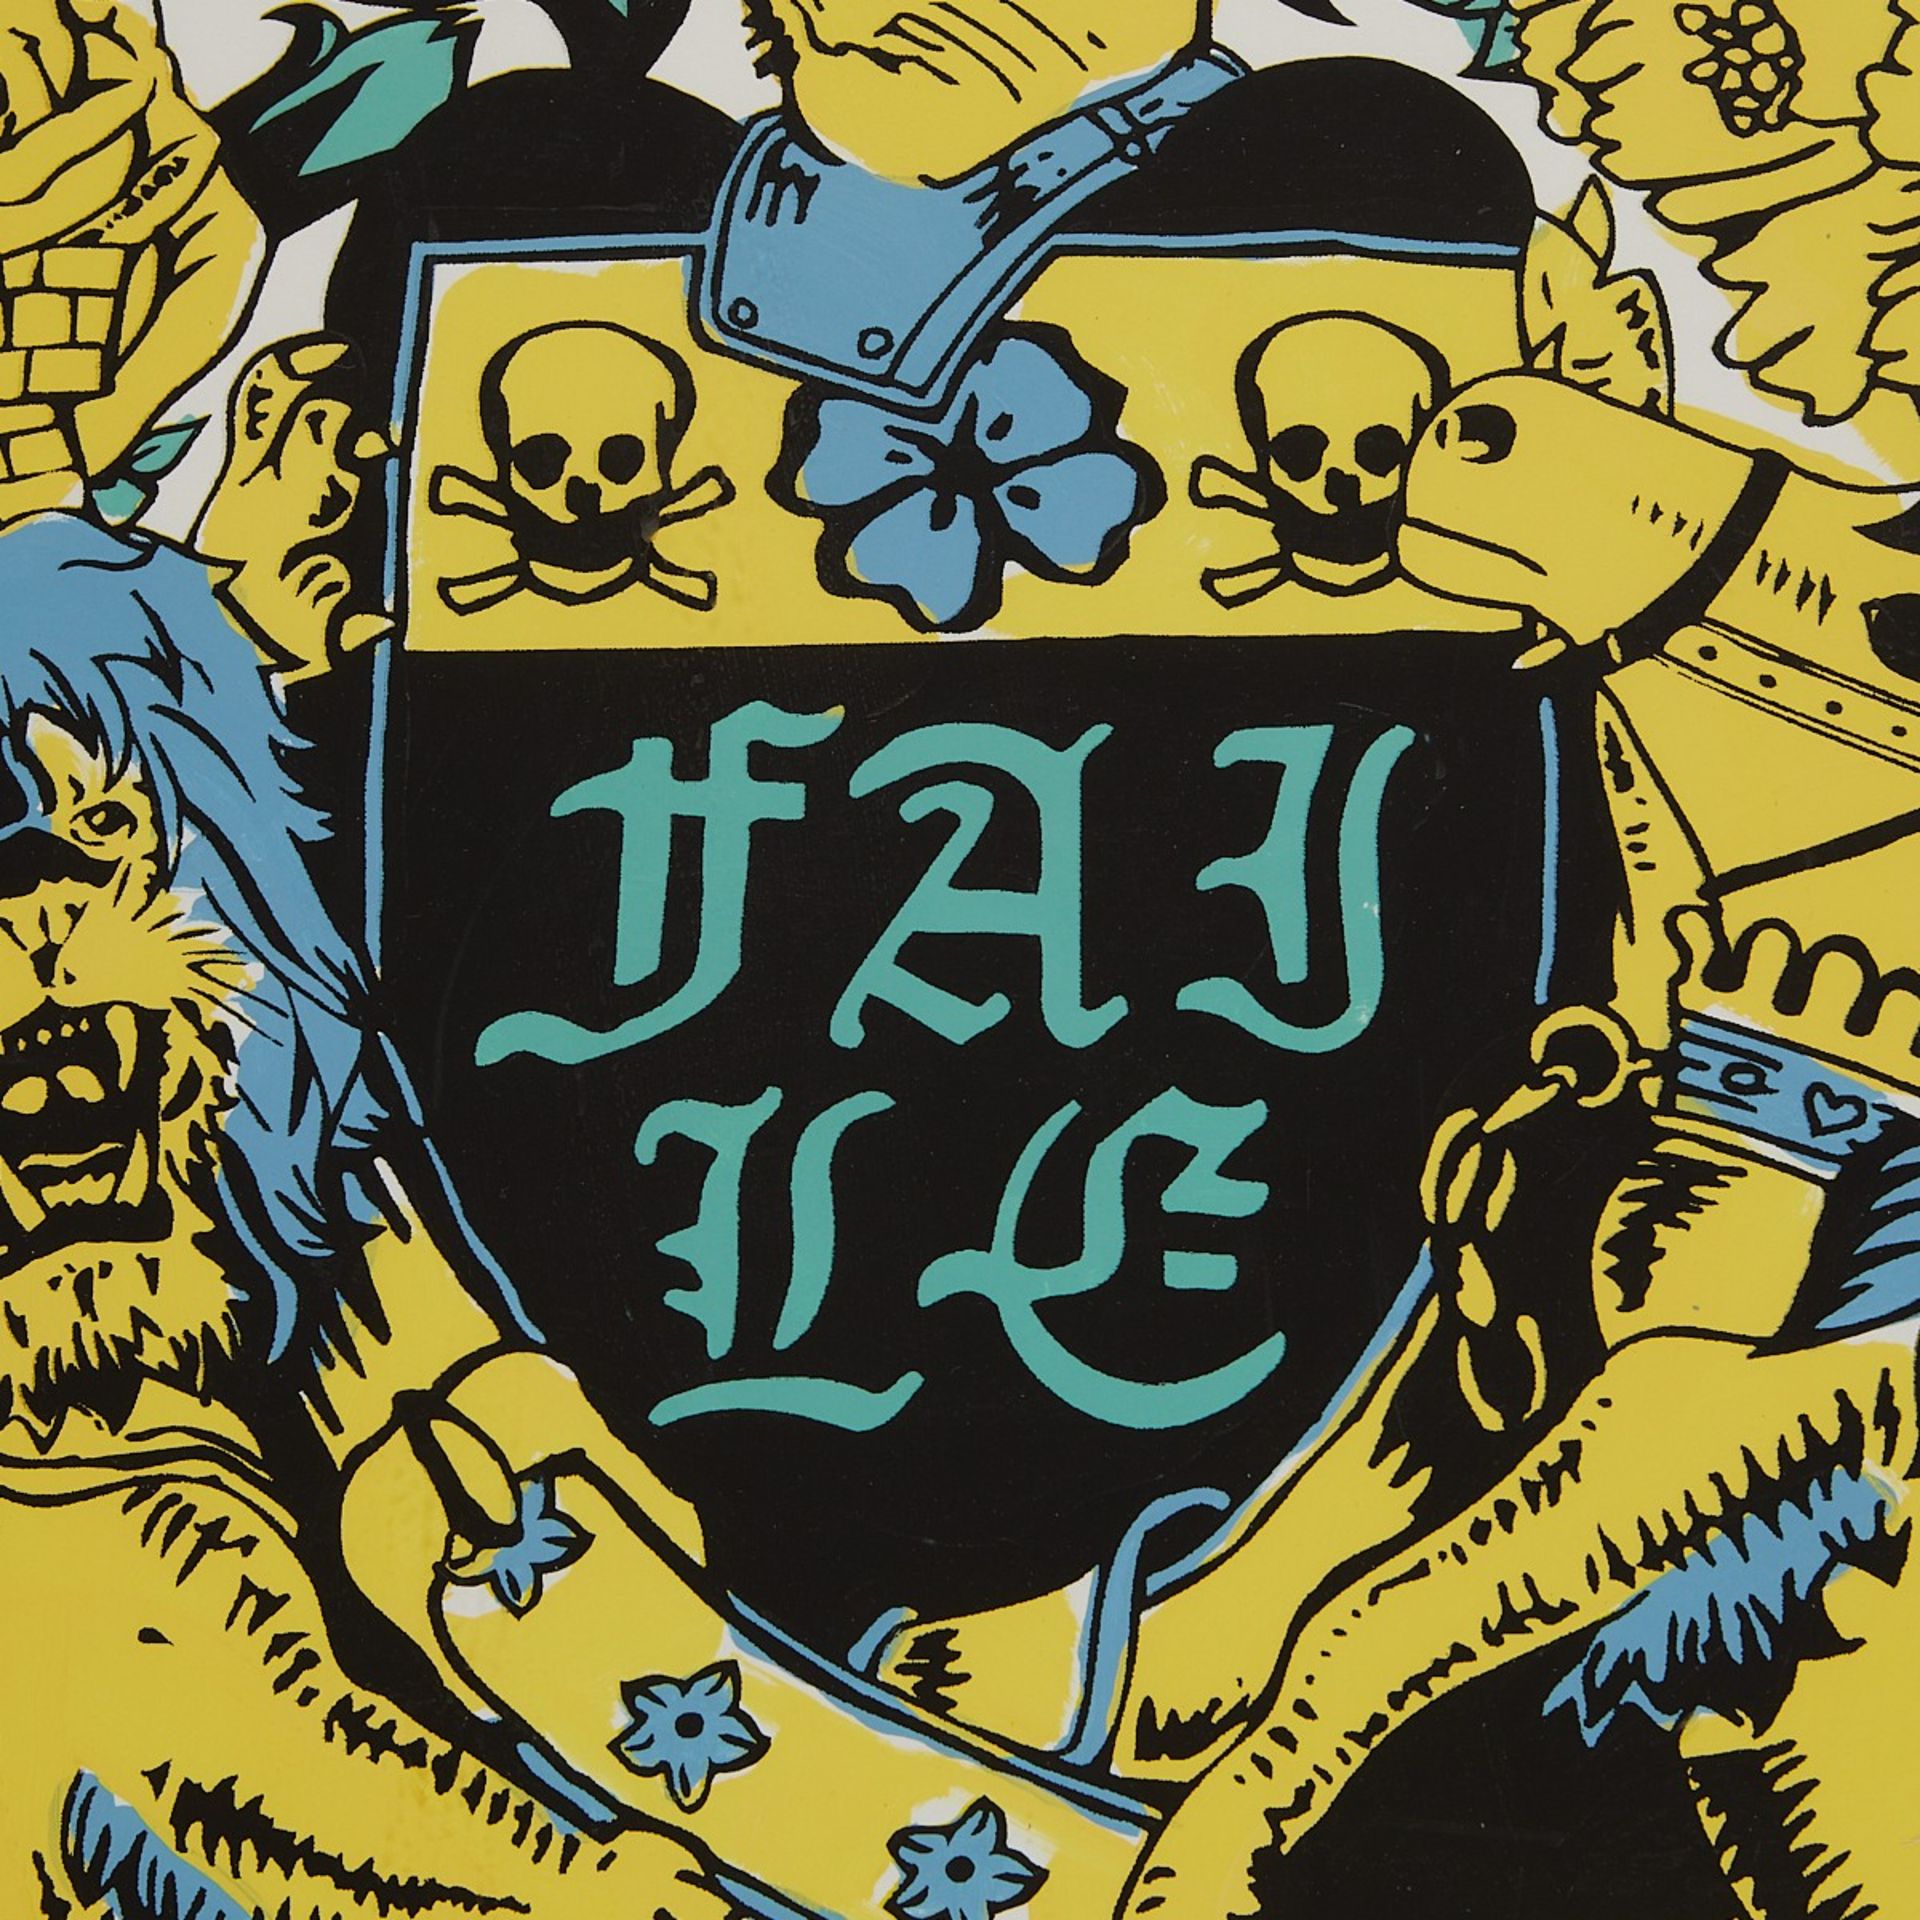 FAILE New York Coat of Arms Serigraph 2003 - Image 2 of 5